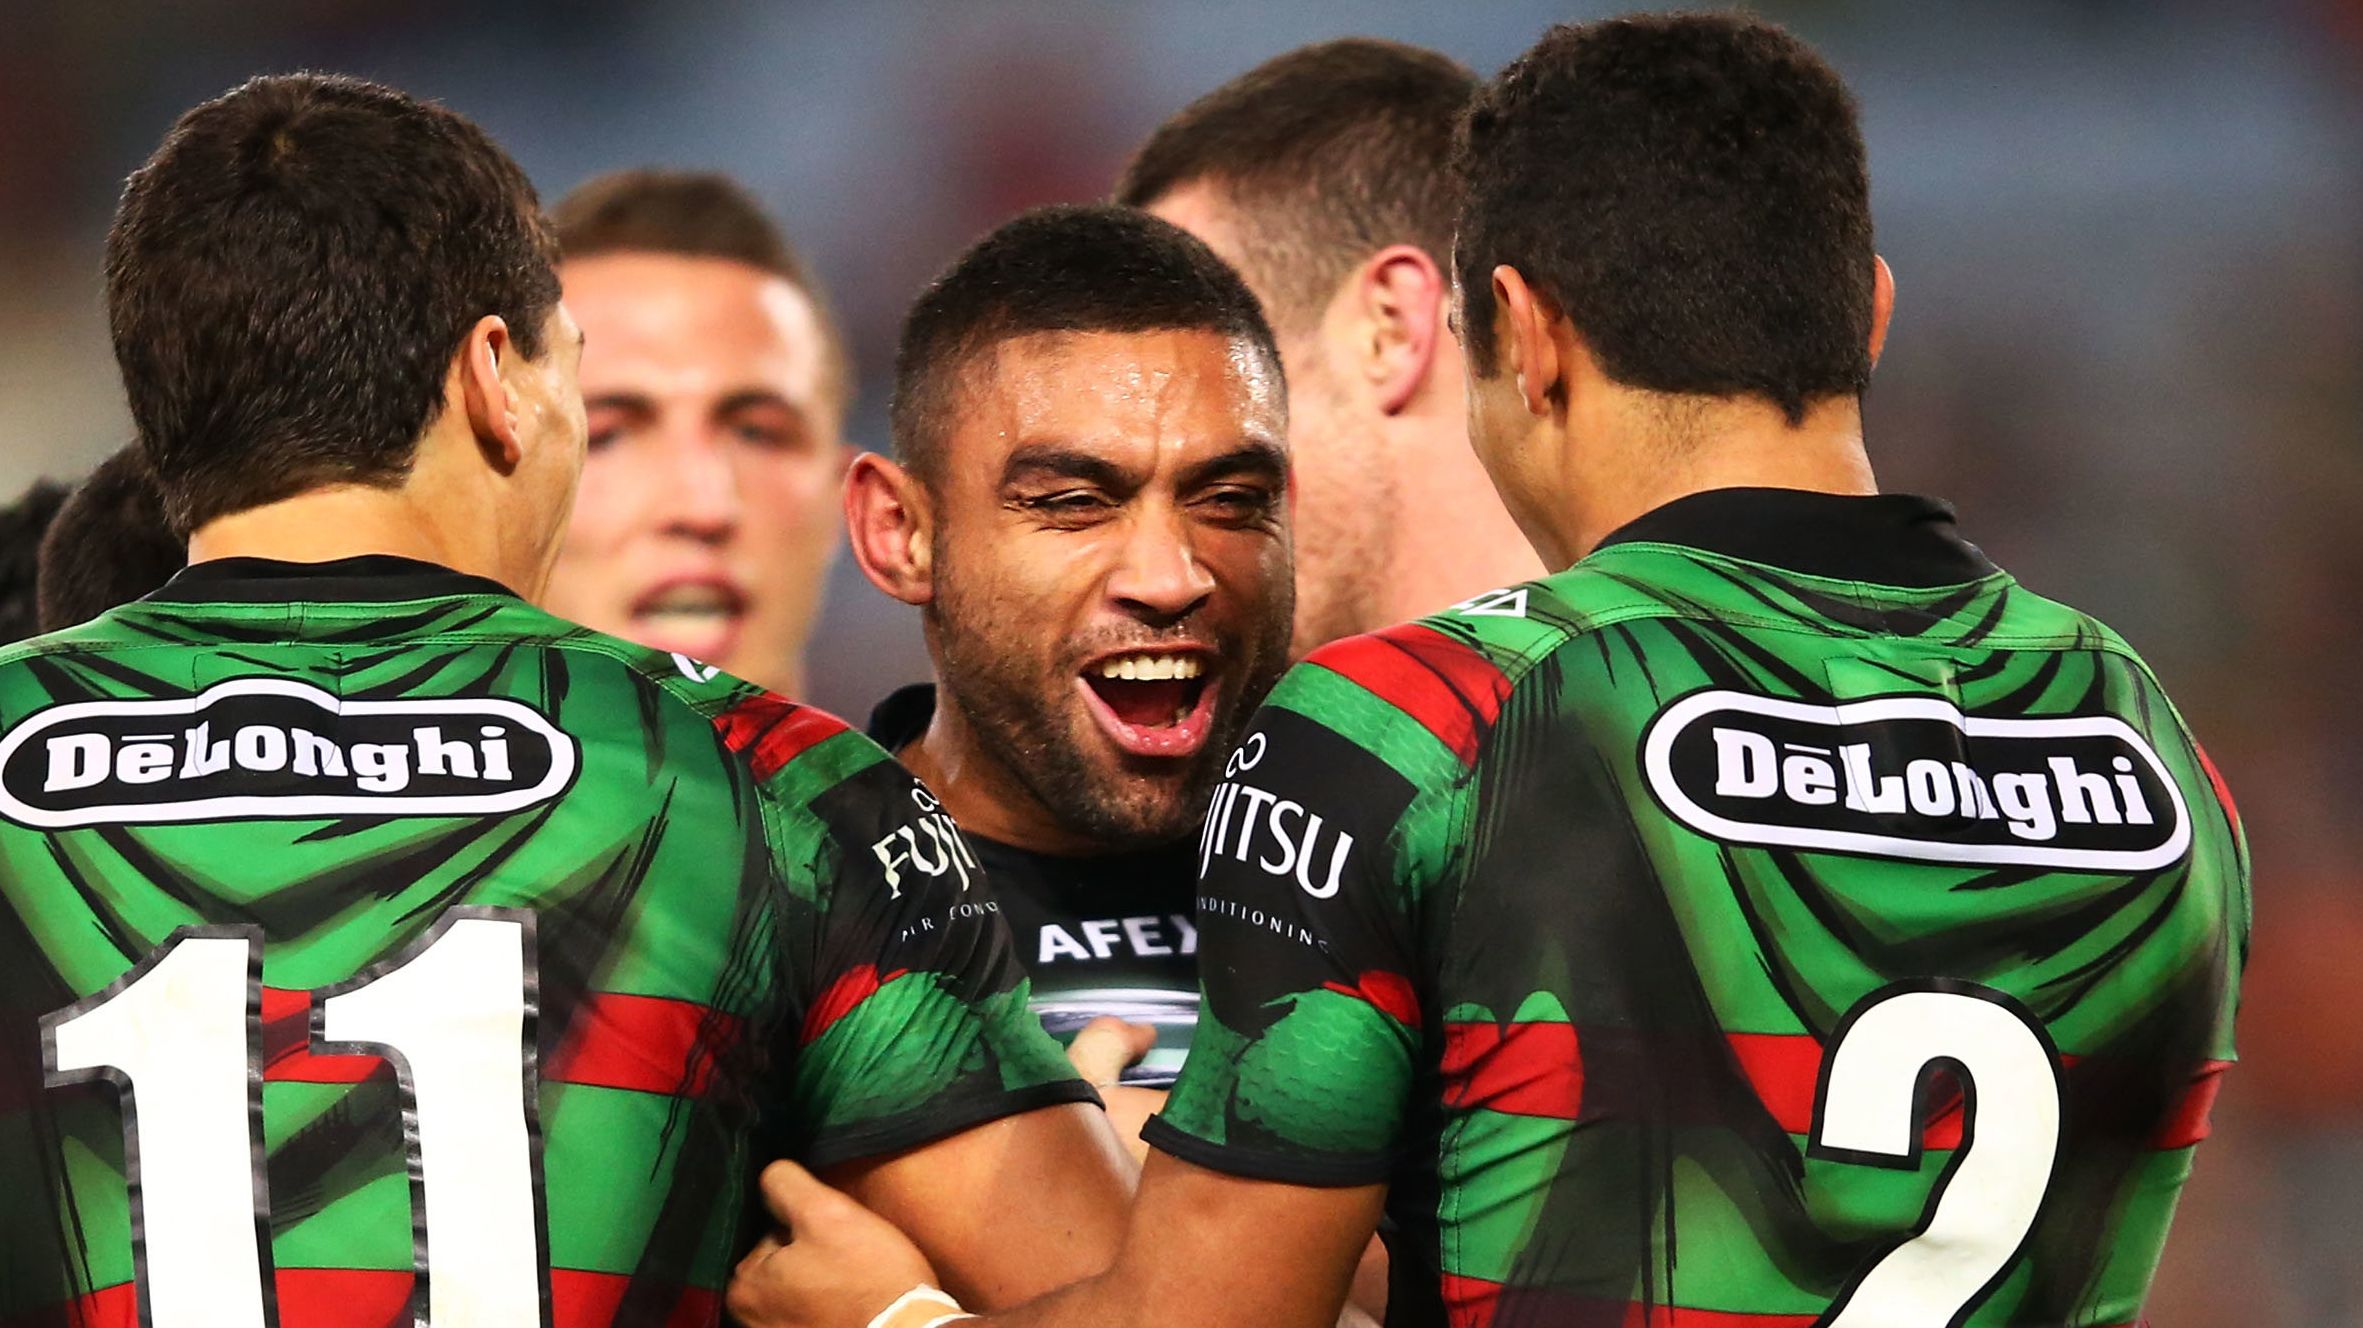 Nathan Merritt celebrates a try during the round 14 NRL match between the South Sydney Rabbitohs and the Wests Tigers at ANZ Stadium on June 13, 2014 in Sydney, Australia.